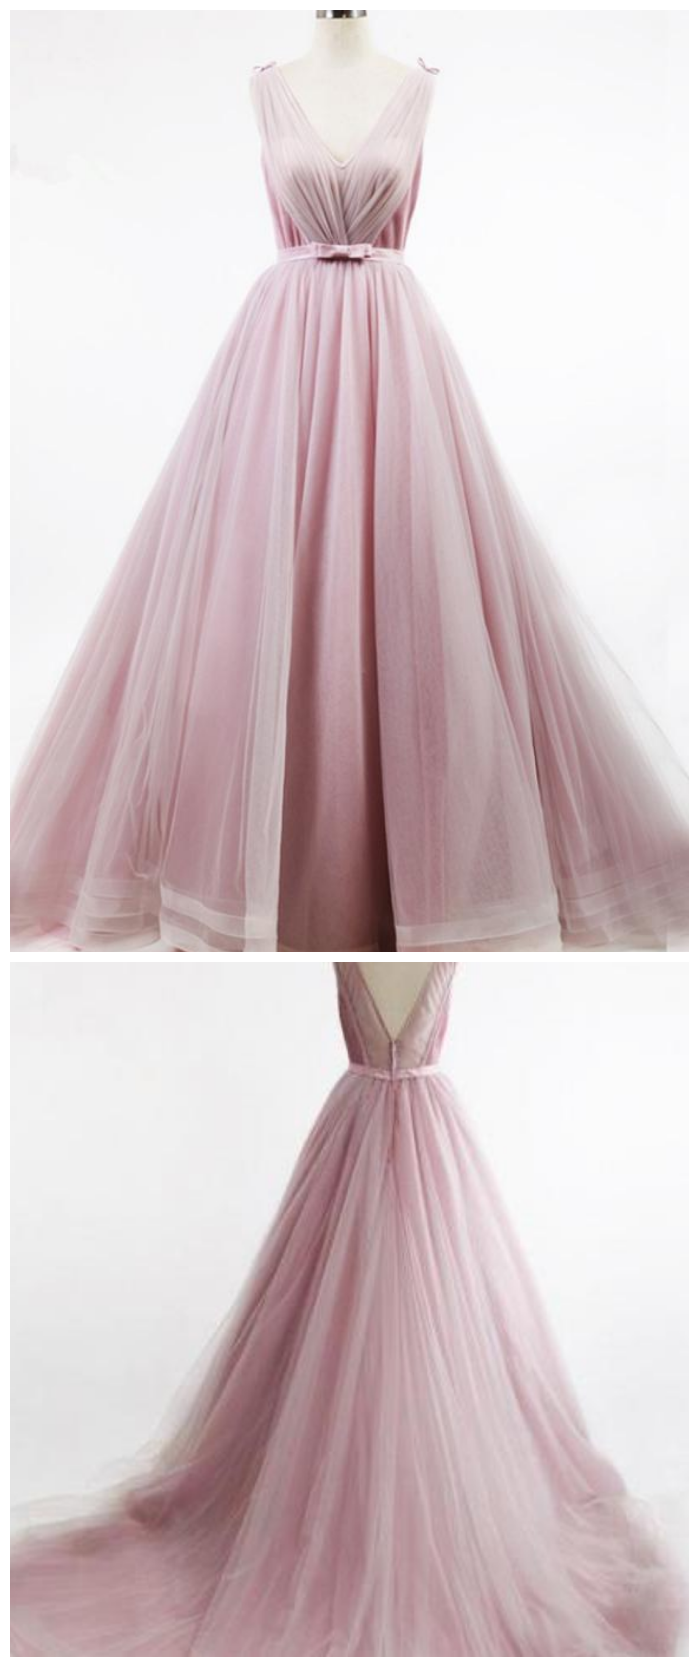 V Neck Prom Dress, Sexy Tulle Prom Dresses, Long Evening Dress, Formal Gowns